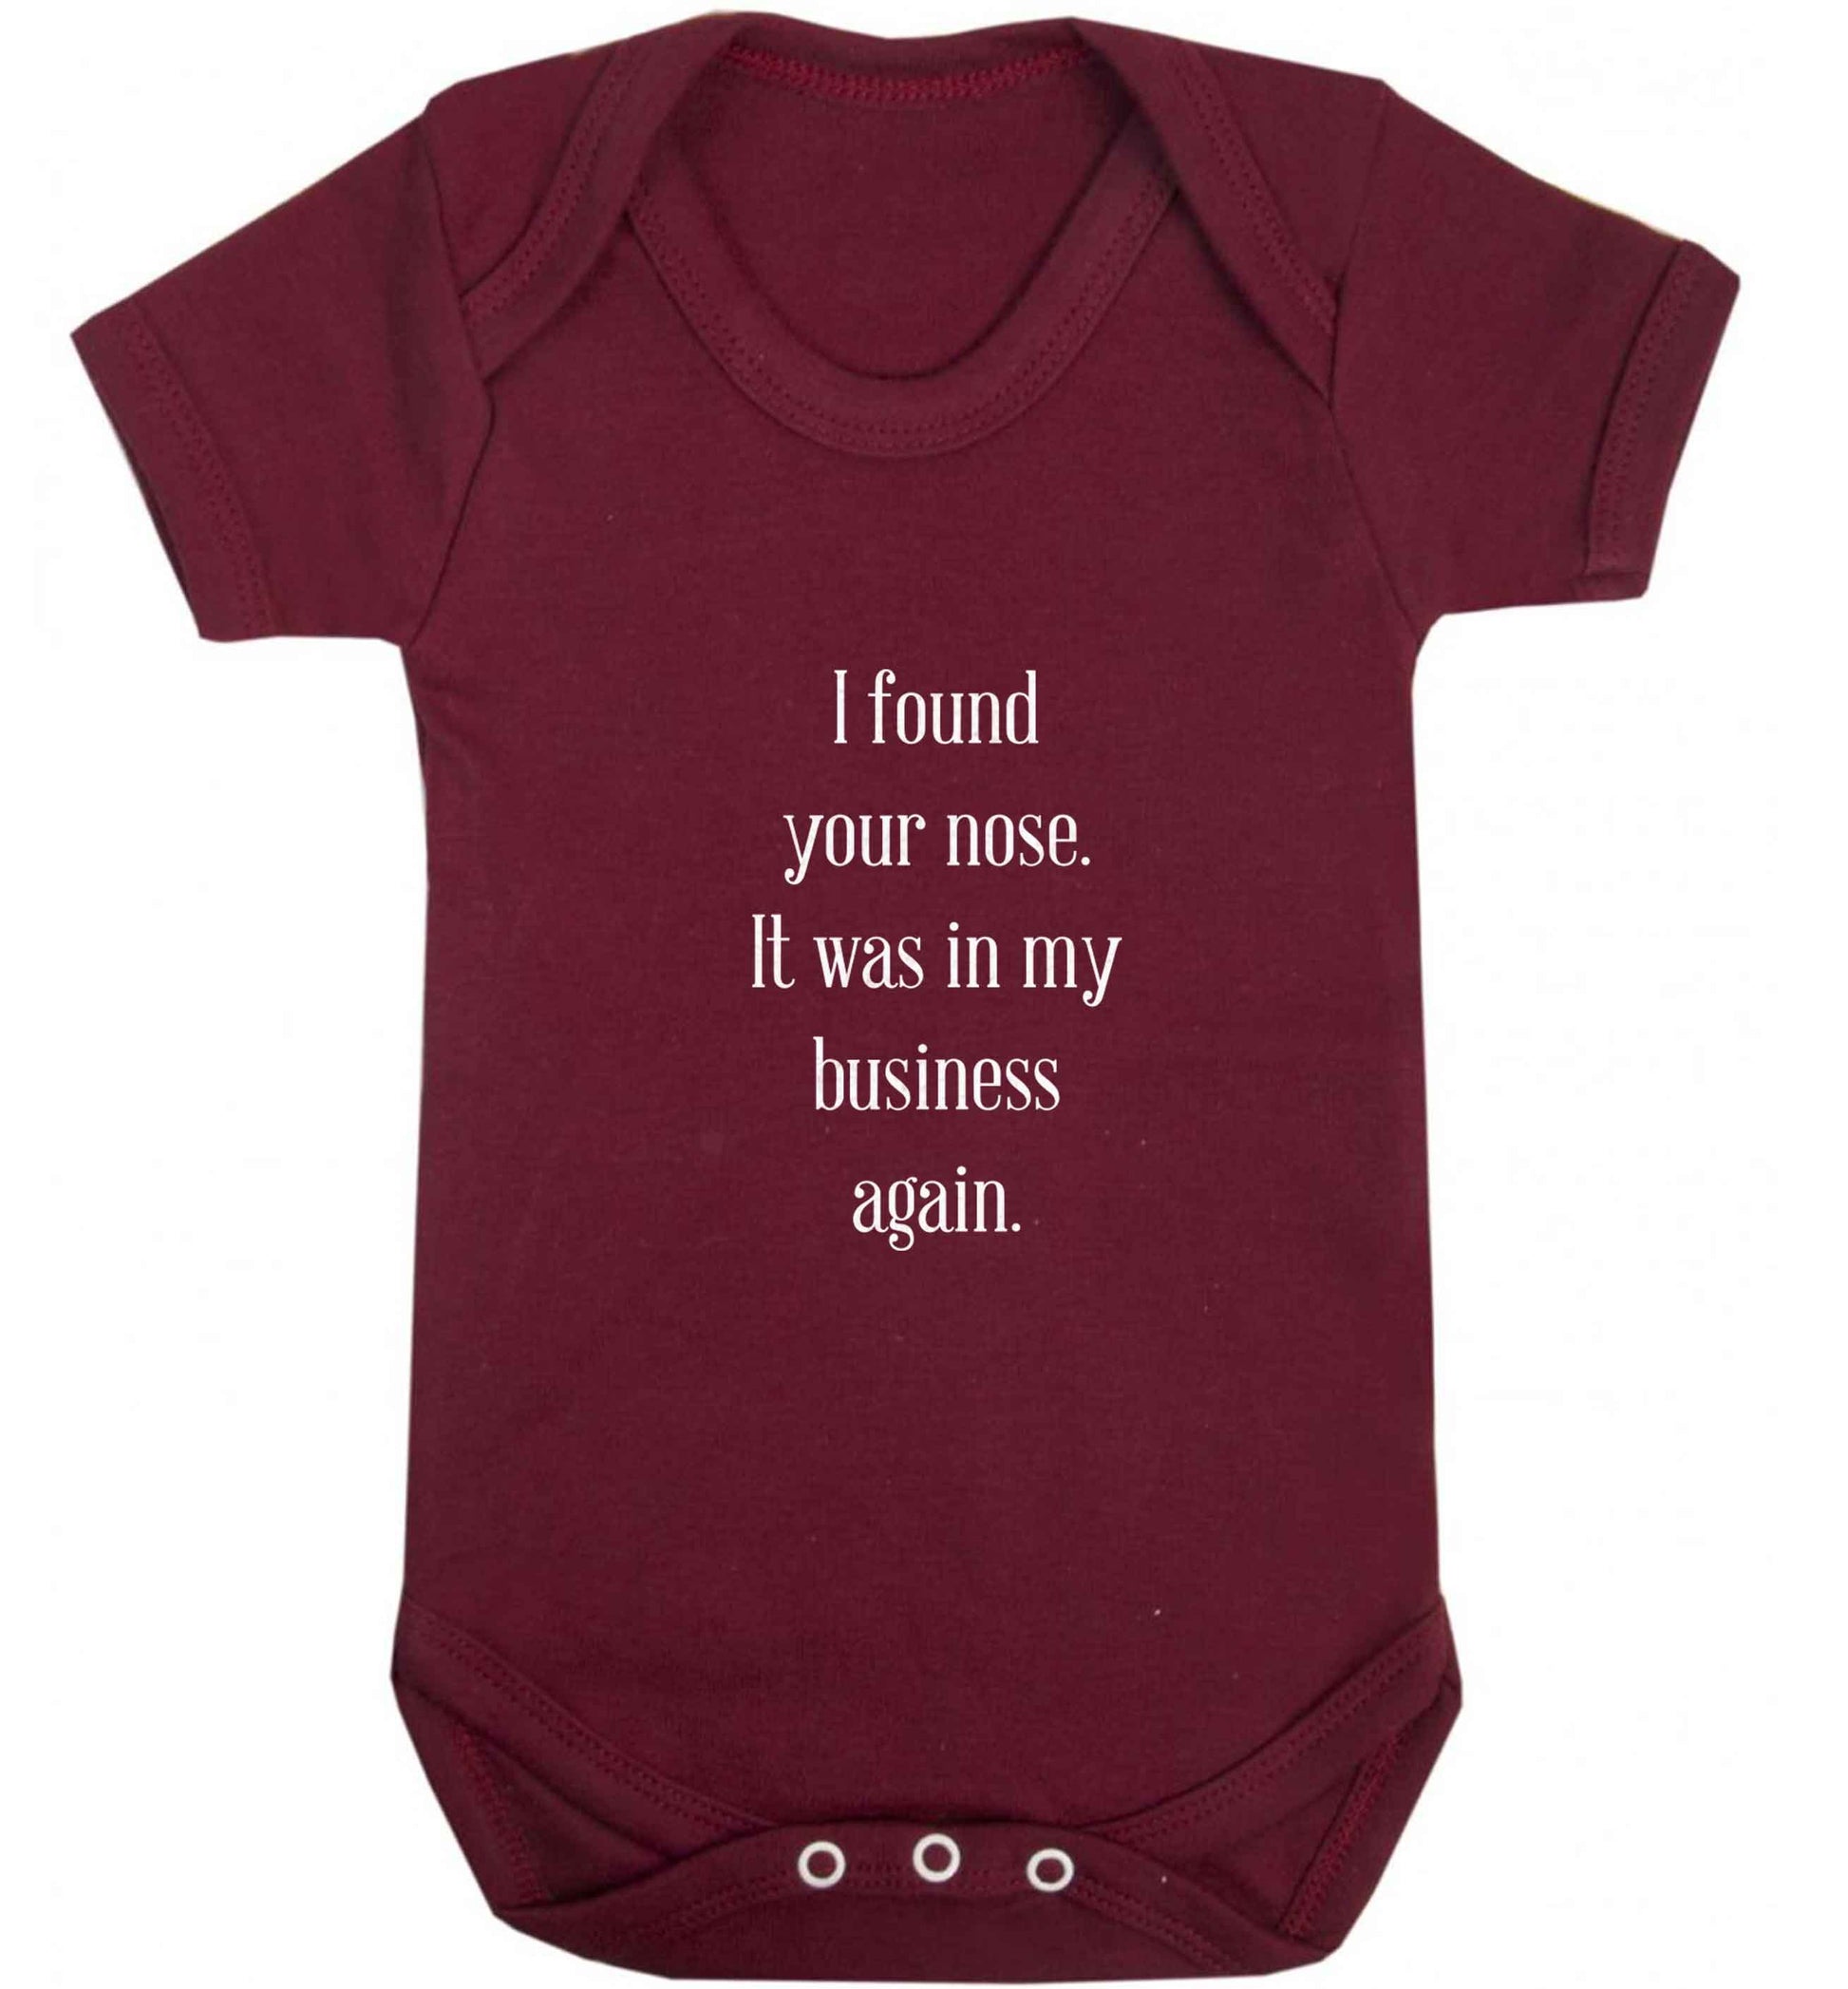 I found your nose it was in my business again baby vest maroon 18-24 months